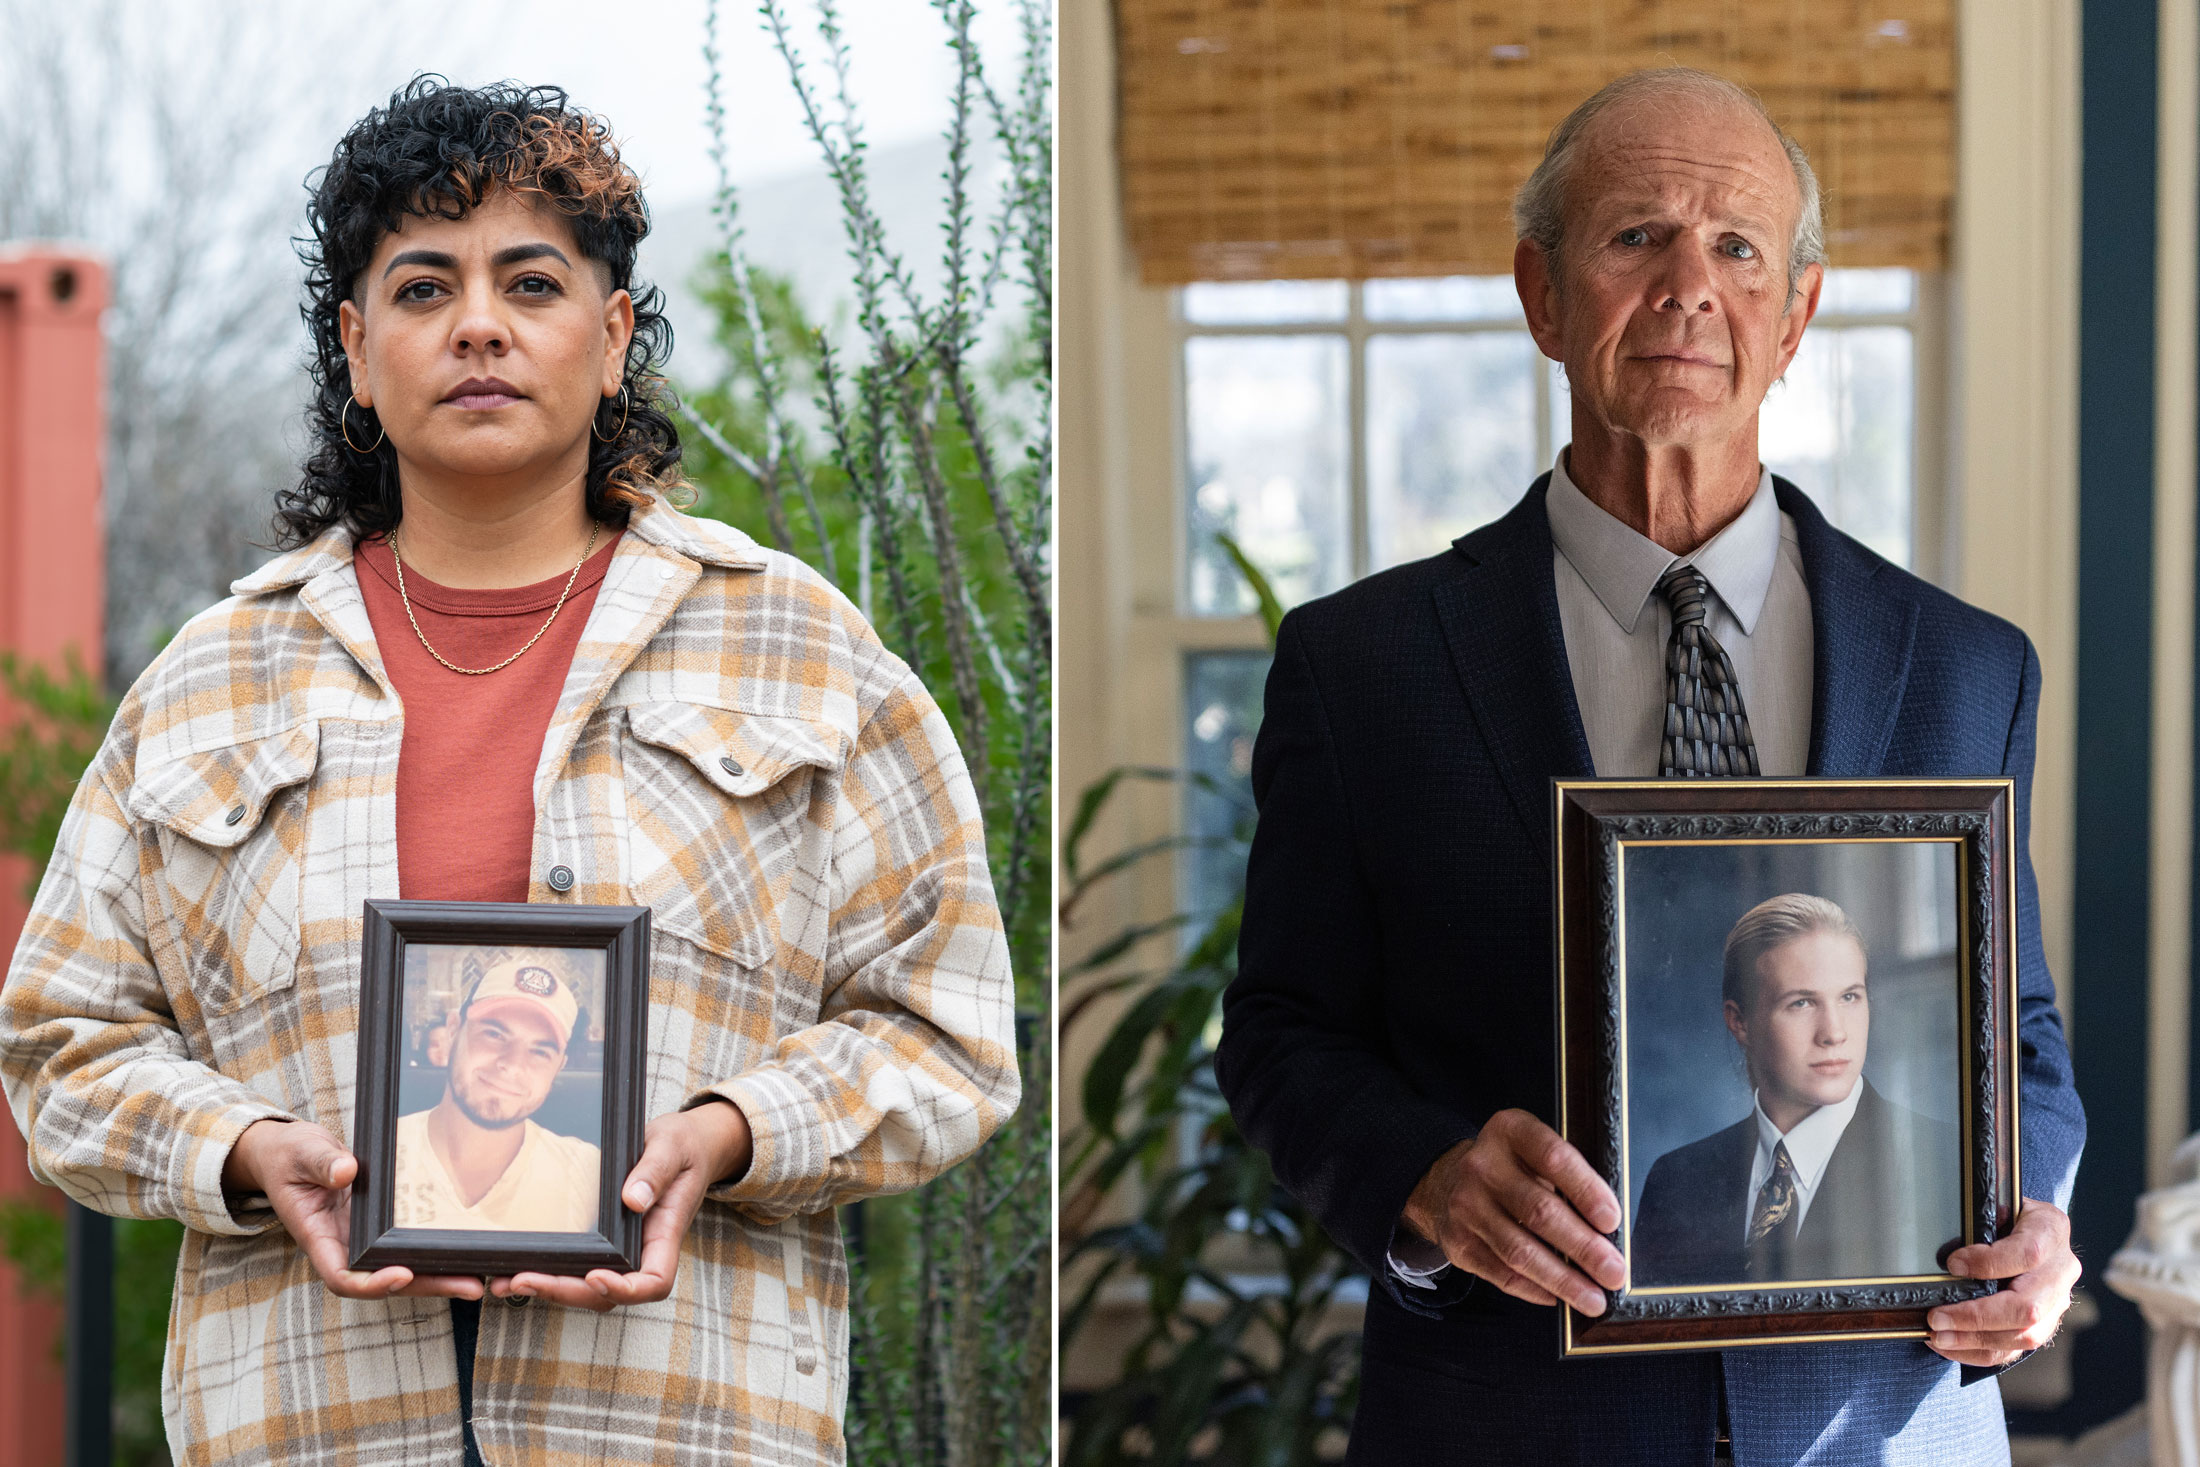 Lane Santa Cruz lost her brother&nbsp;Jorge to a fentanyl overdose in 2016. Right:&nbsp;Jim Rauh lost his son&nbsp;Thomas to a fentanyl overdose in 2015.